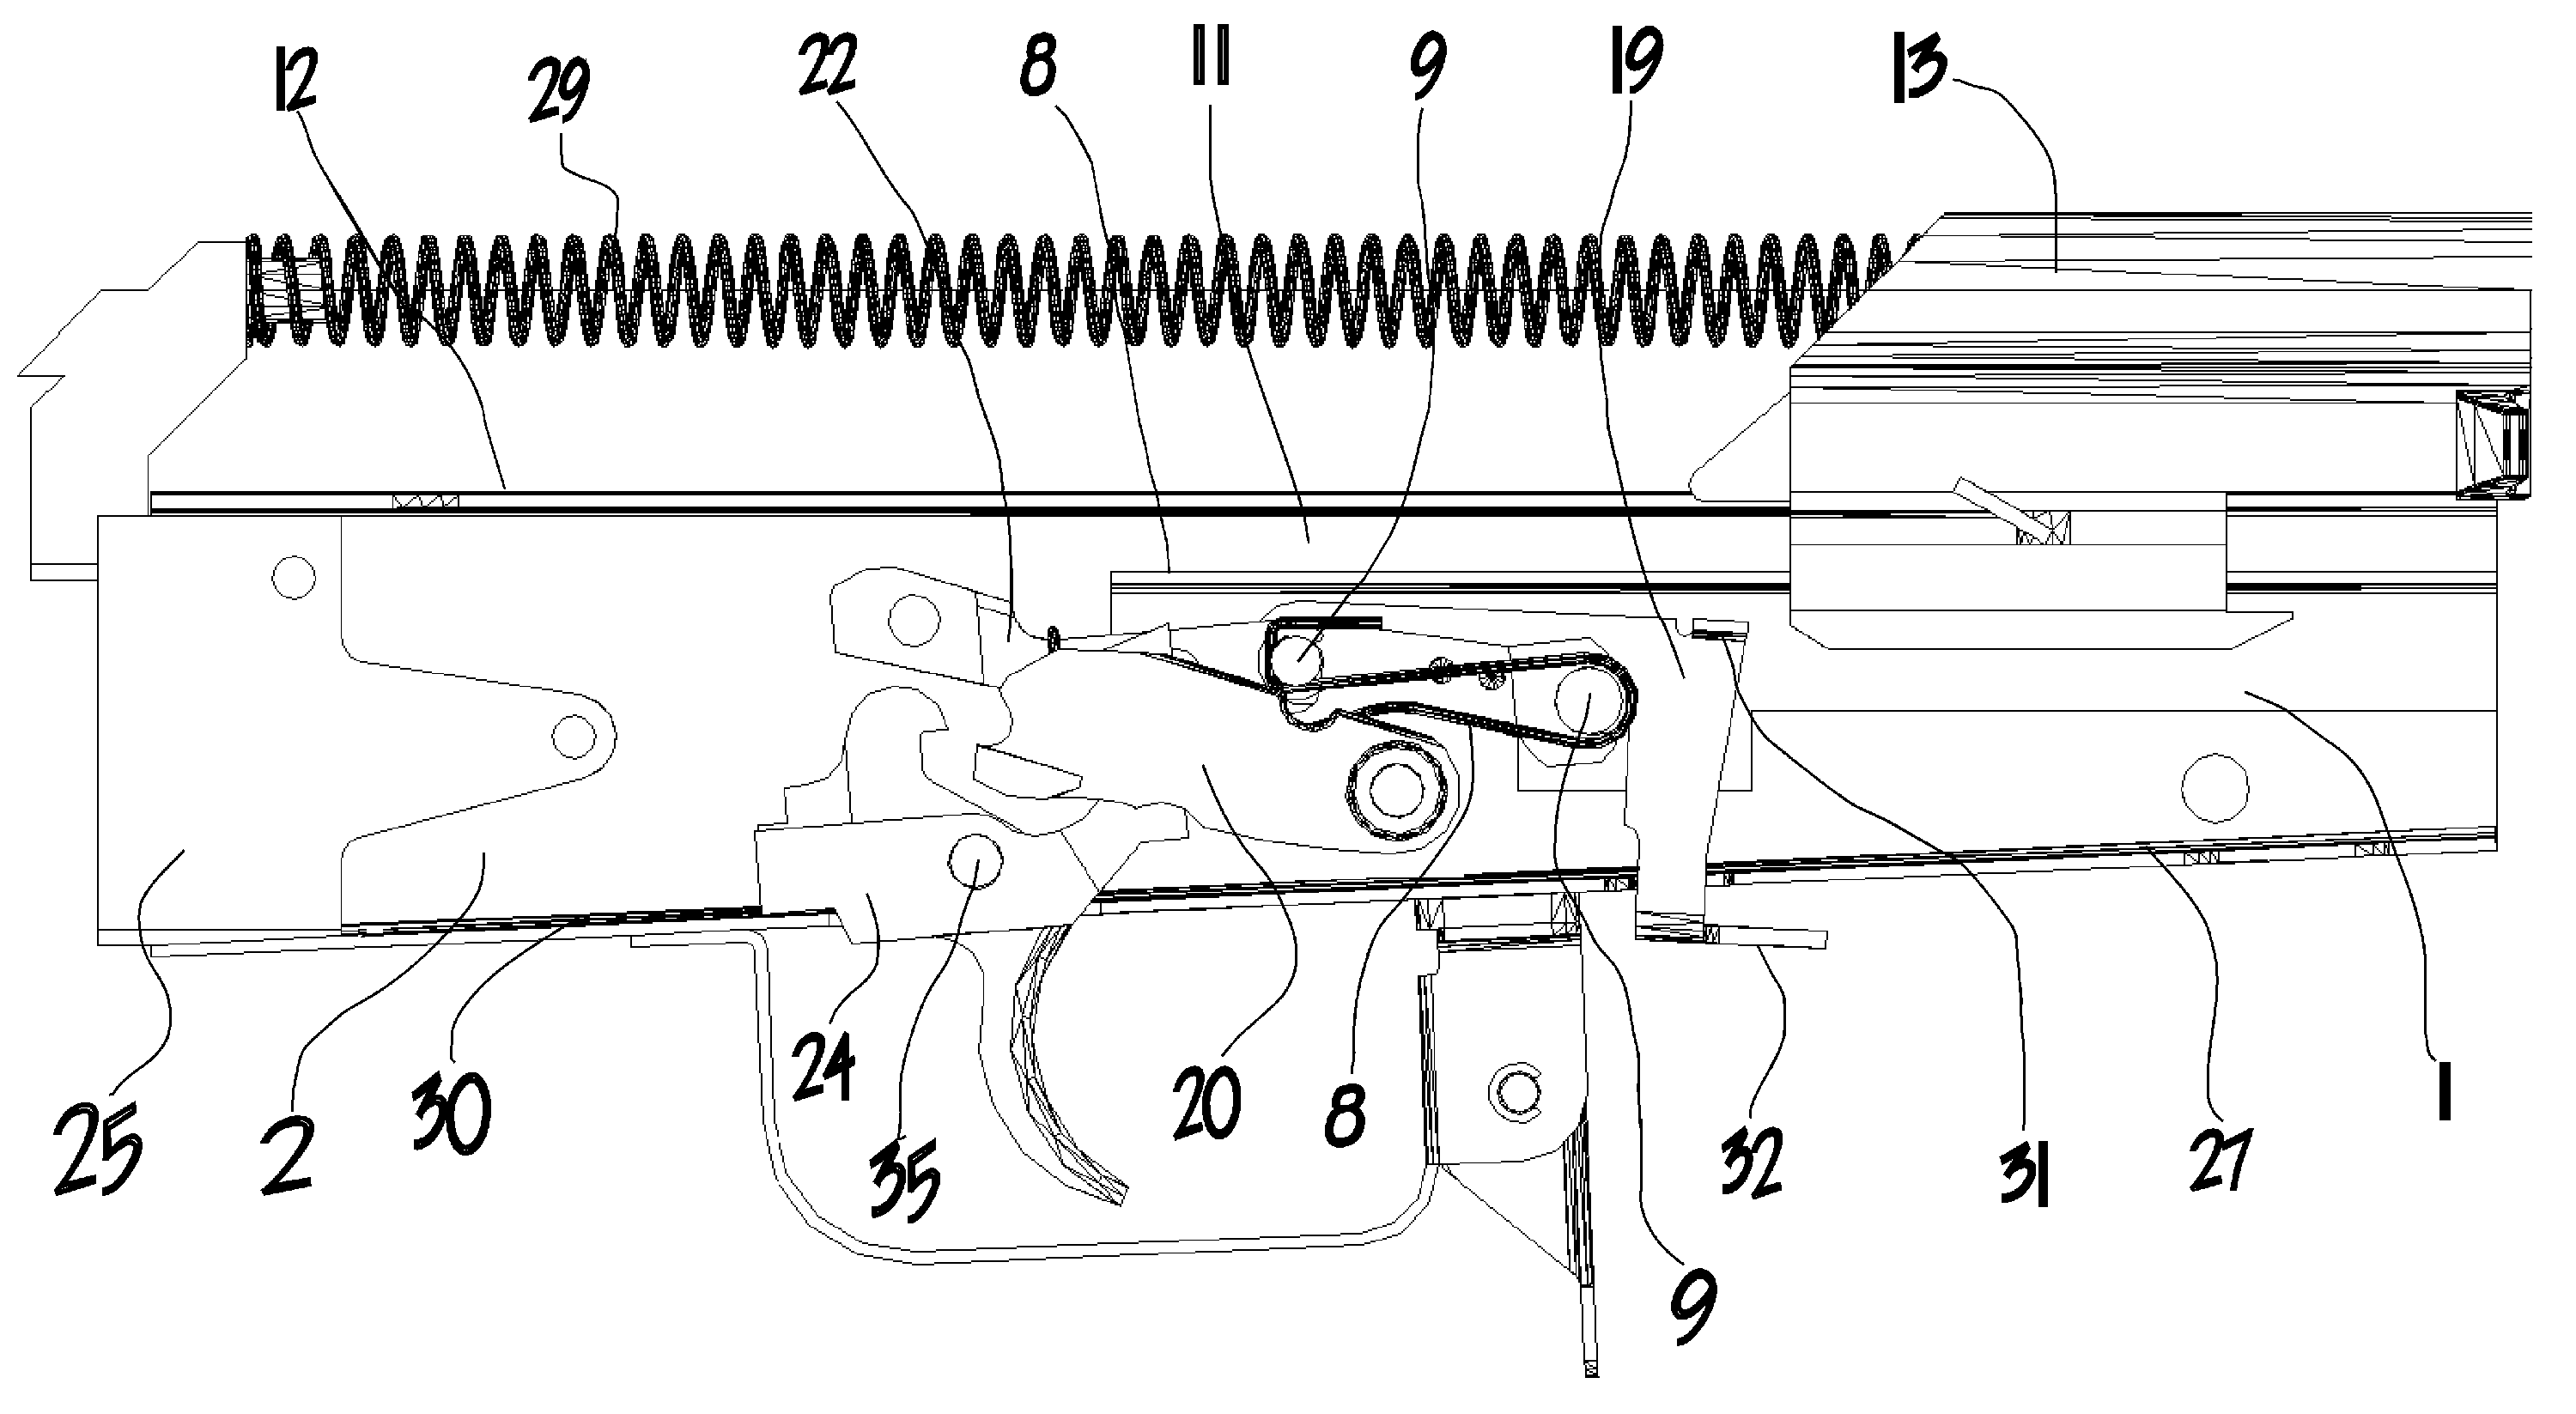 Apparatus and method for preventing the bolt carrier of a firearm from moving forward after firing the last round of ammunition, and signaling when the firearm has run out of ammunition.